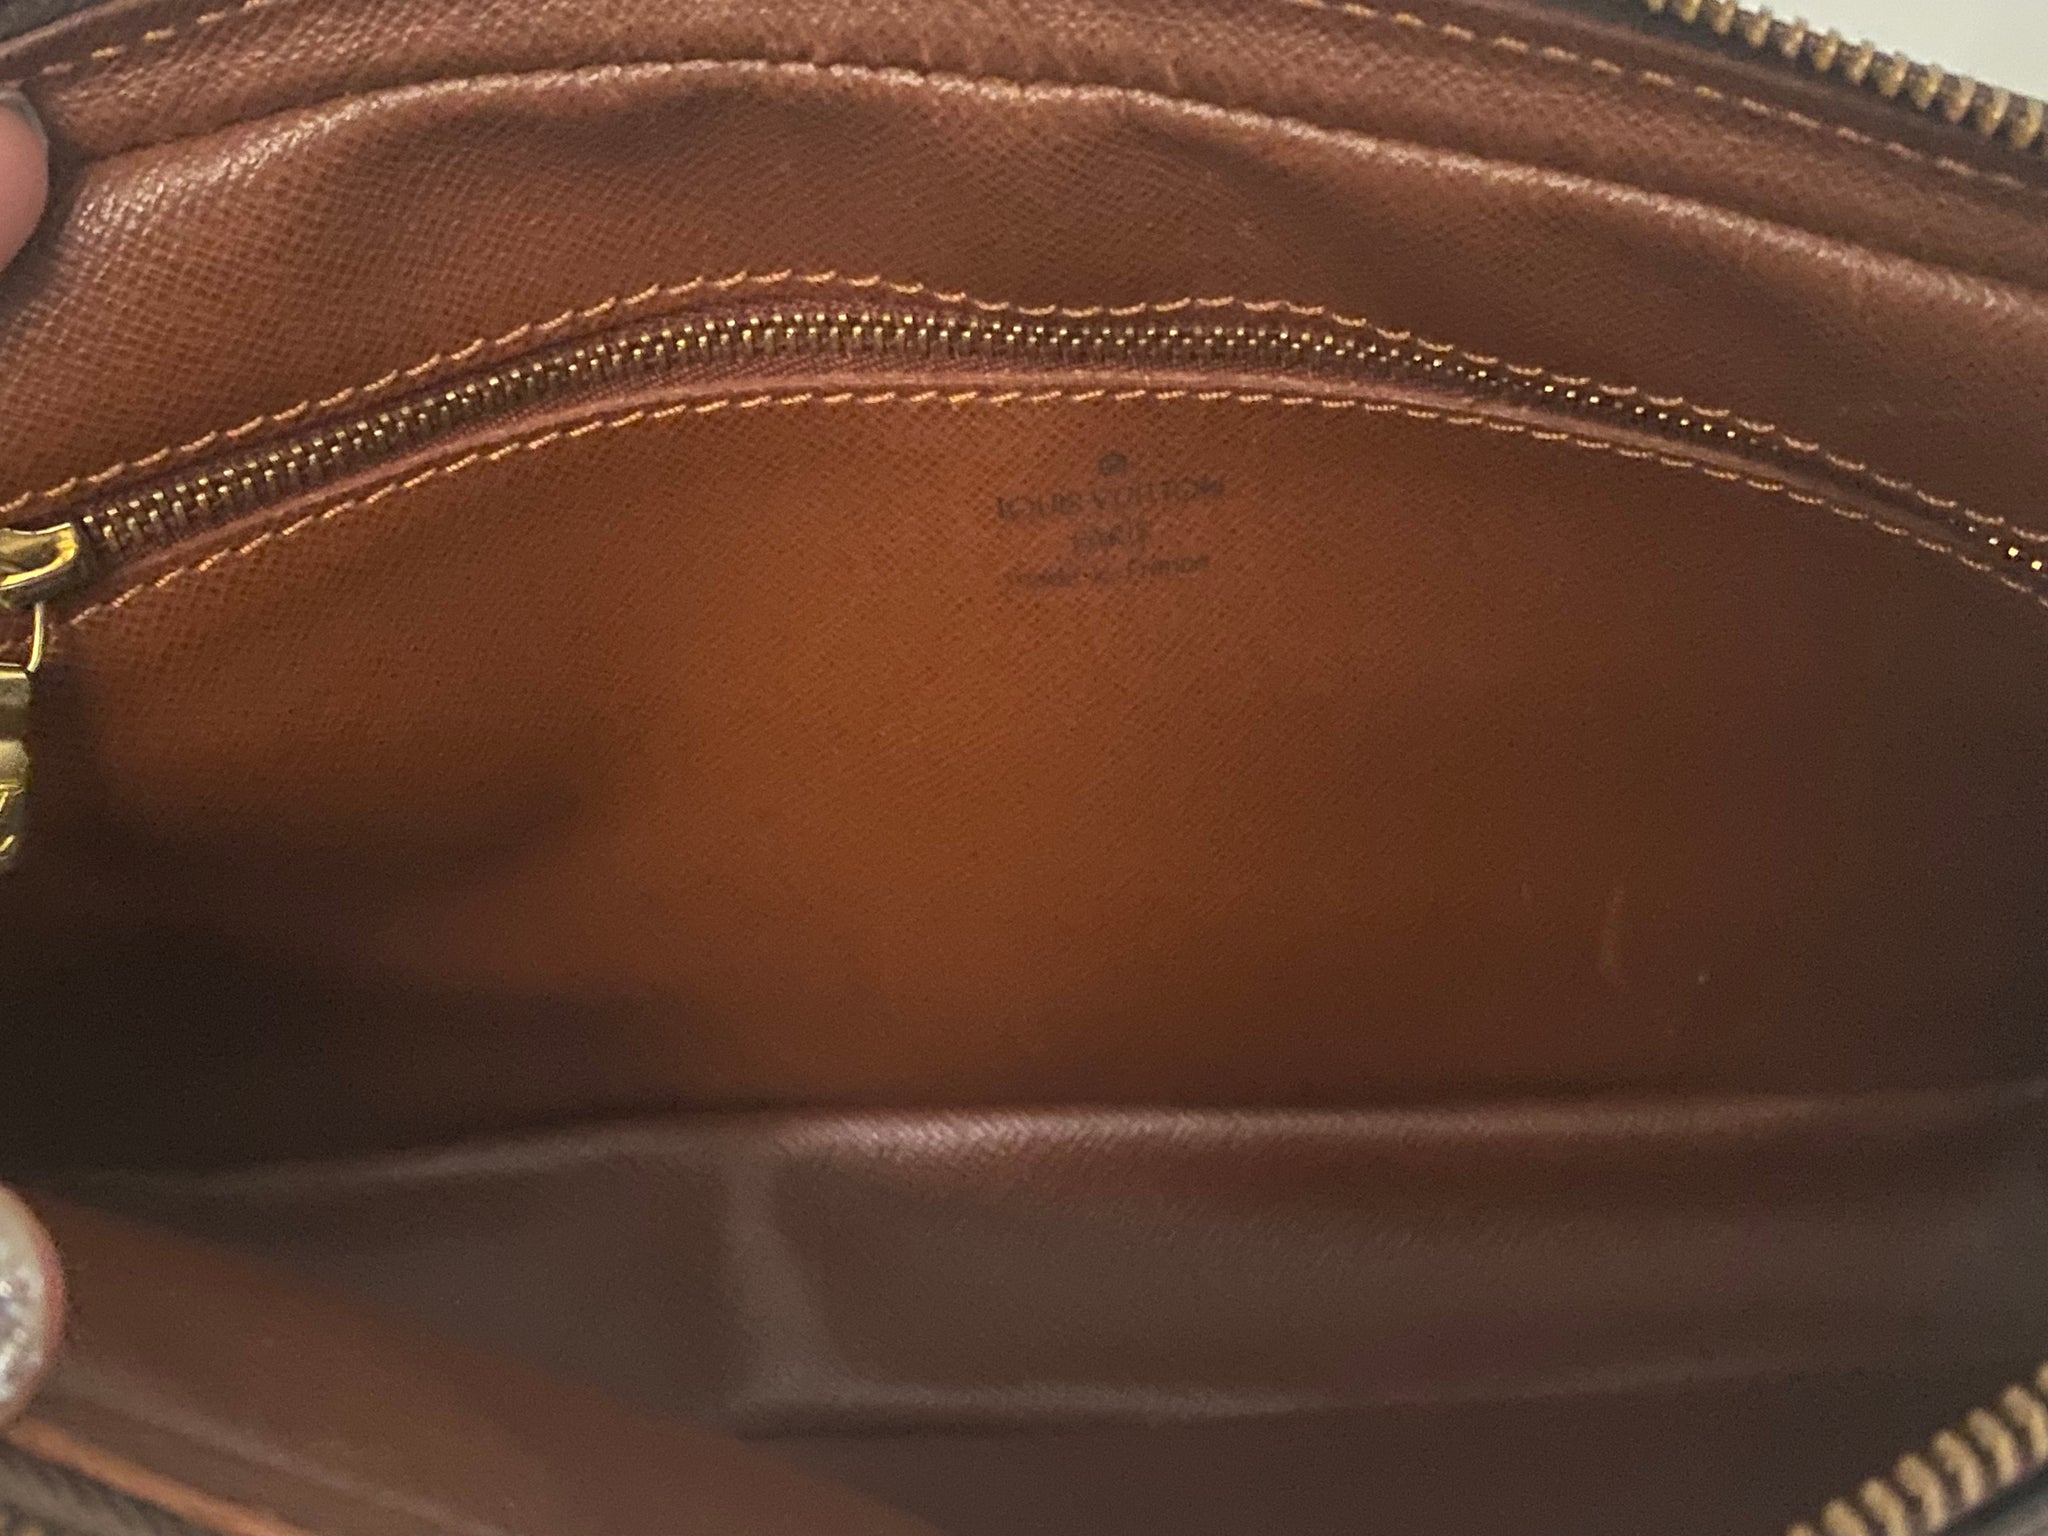 Review: Louis Vuitton Clutch Monogram Marly Dragonne with PVC bag